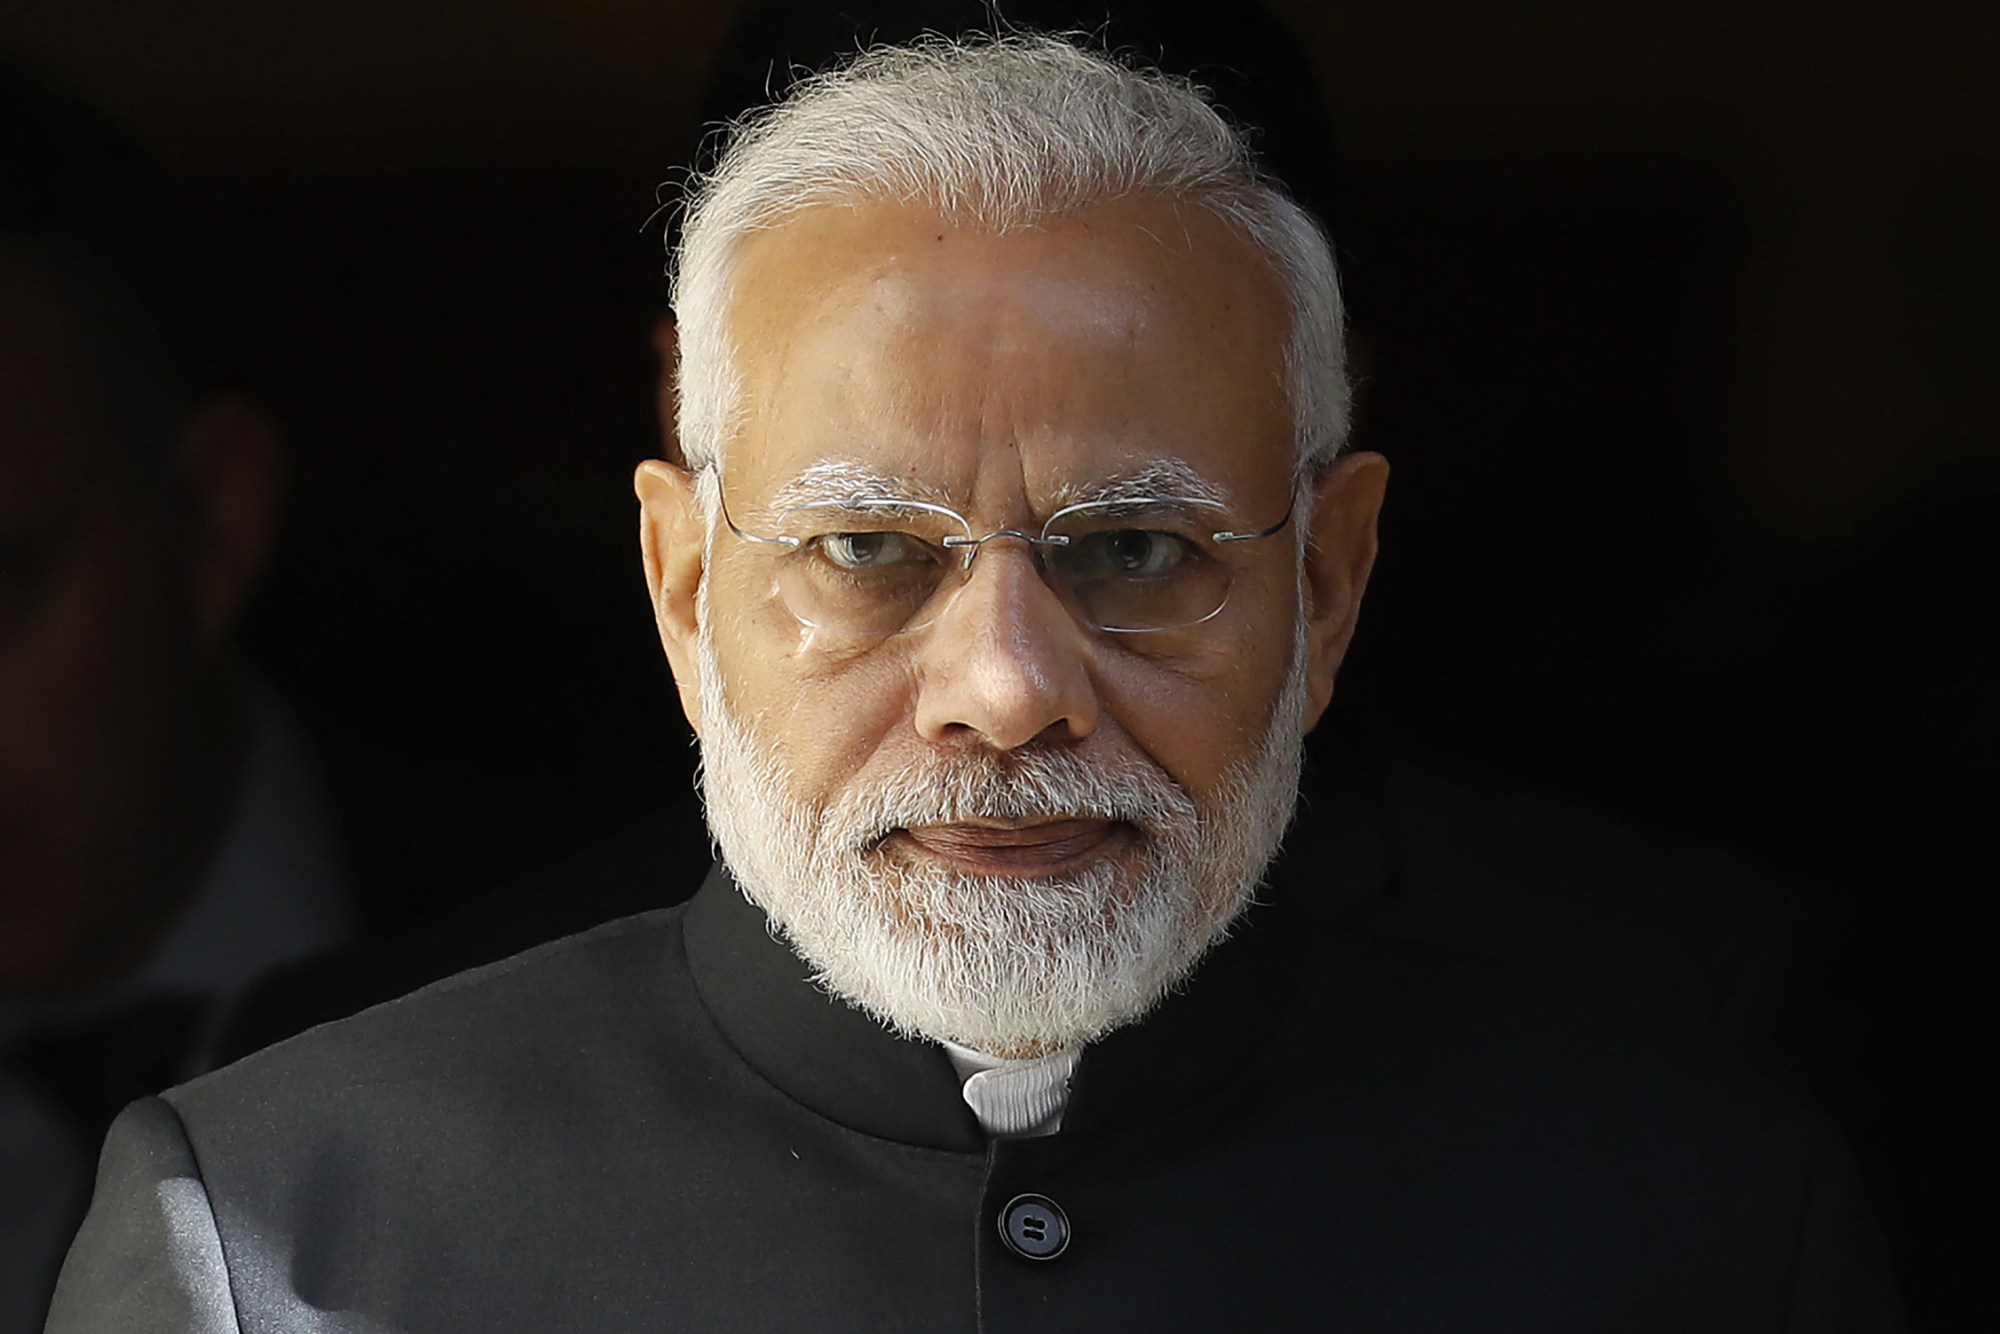 Indian Prime Minister Narendra Modi’s government crackdown on critical media outlets spurred Naik to move to the US. Photo: AFP